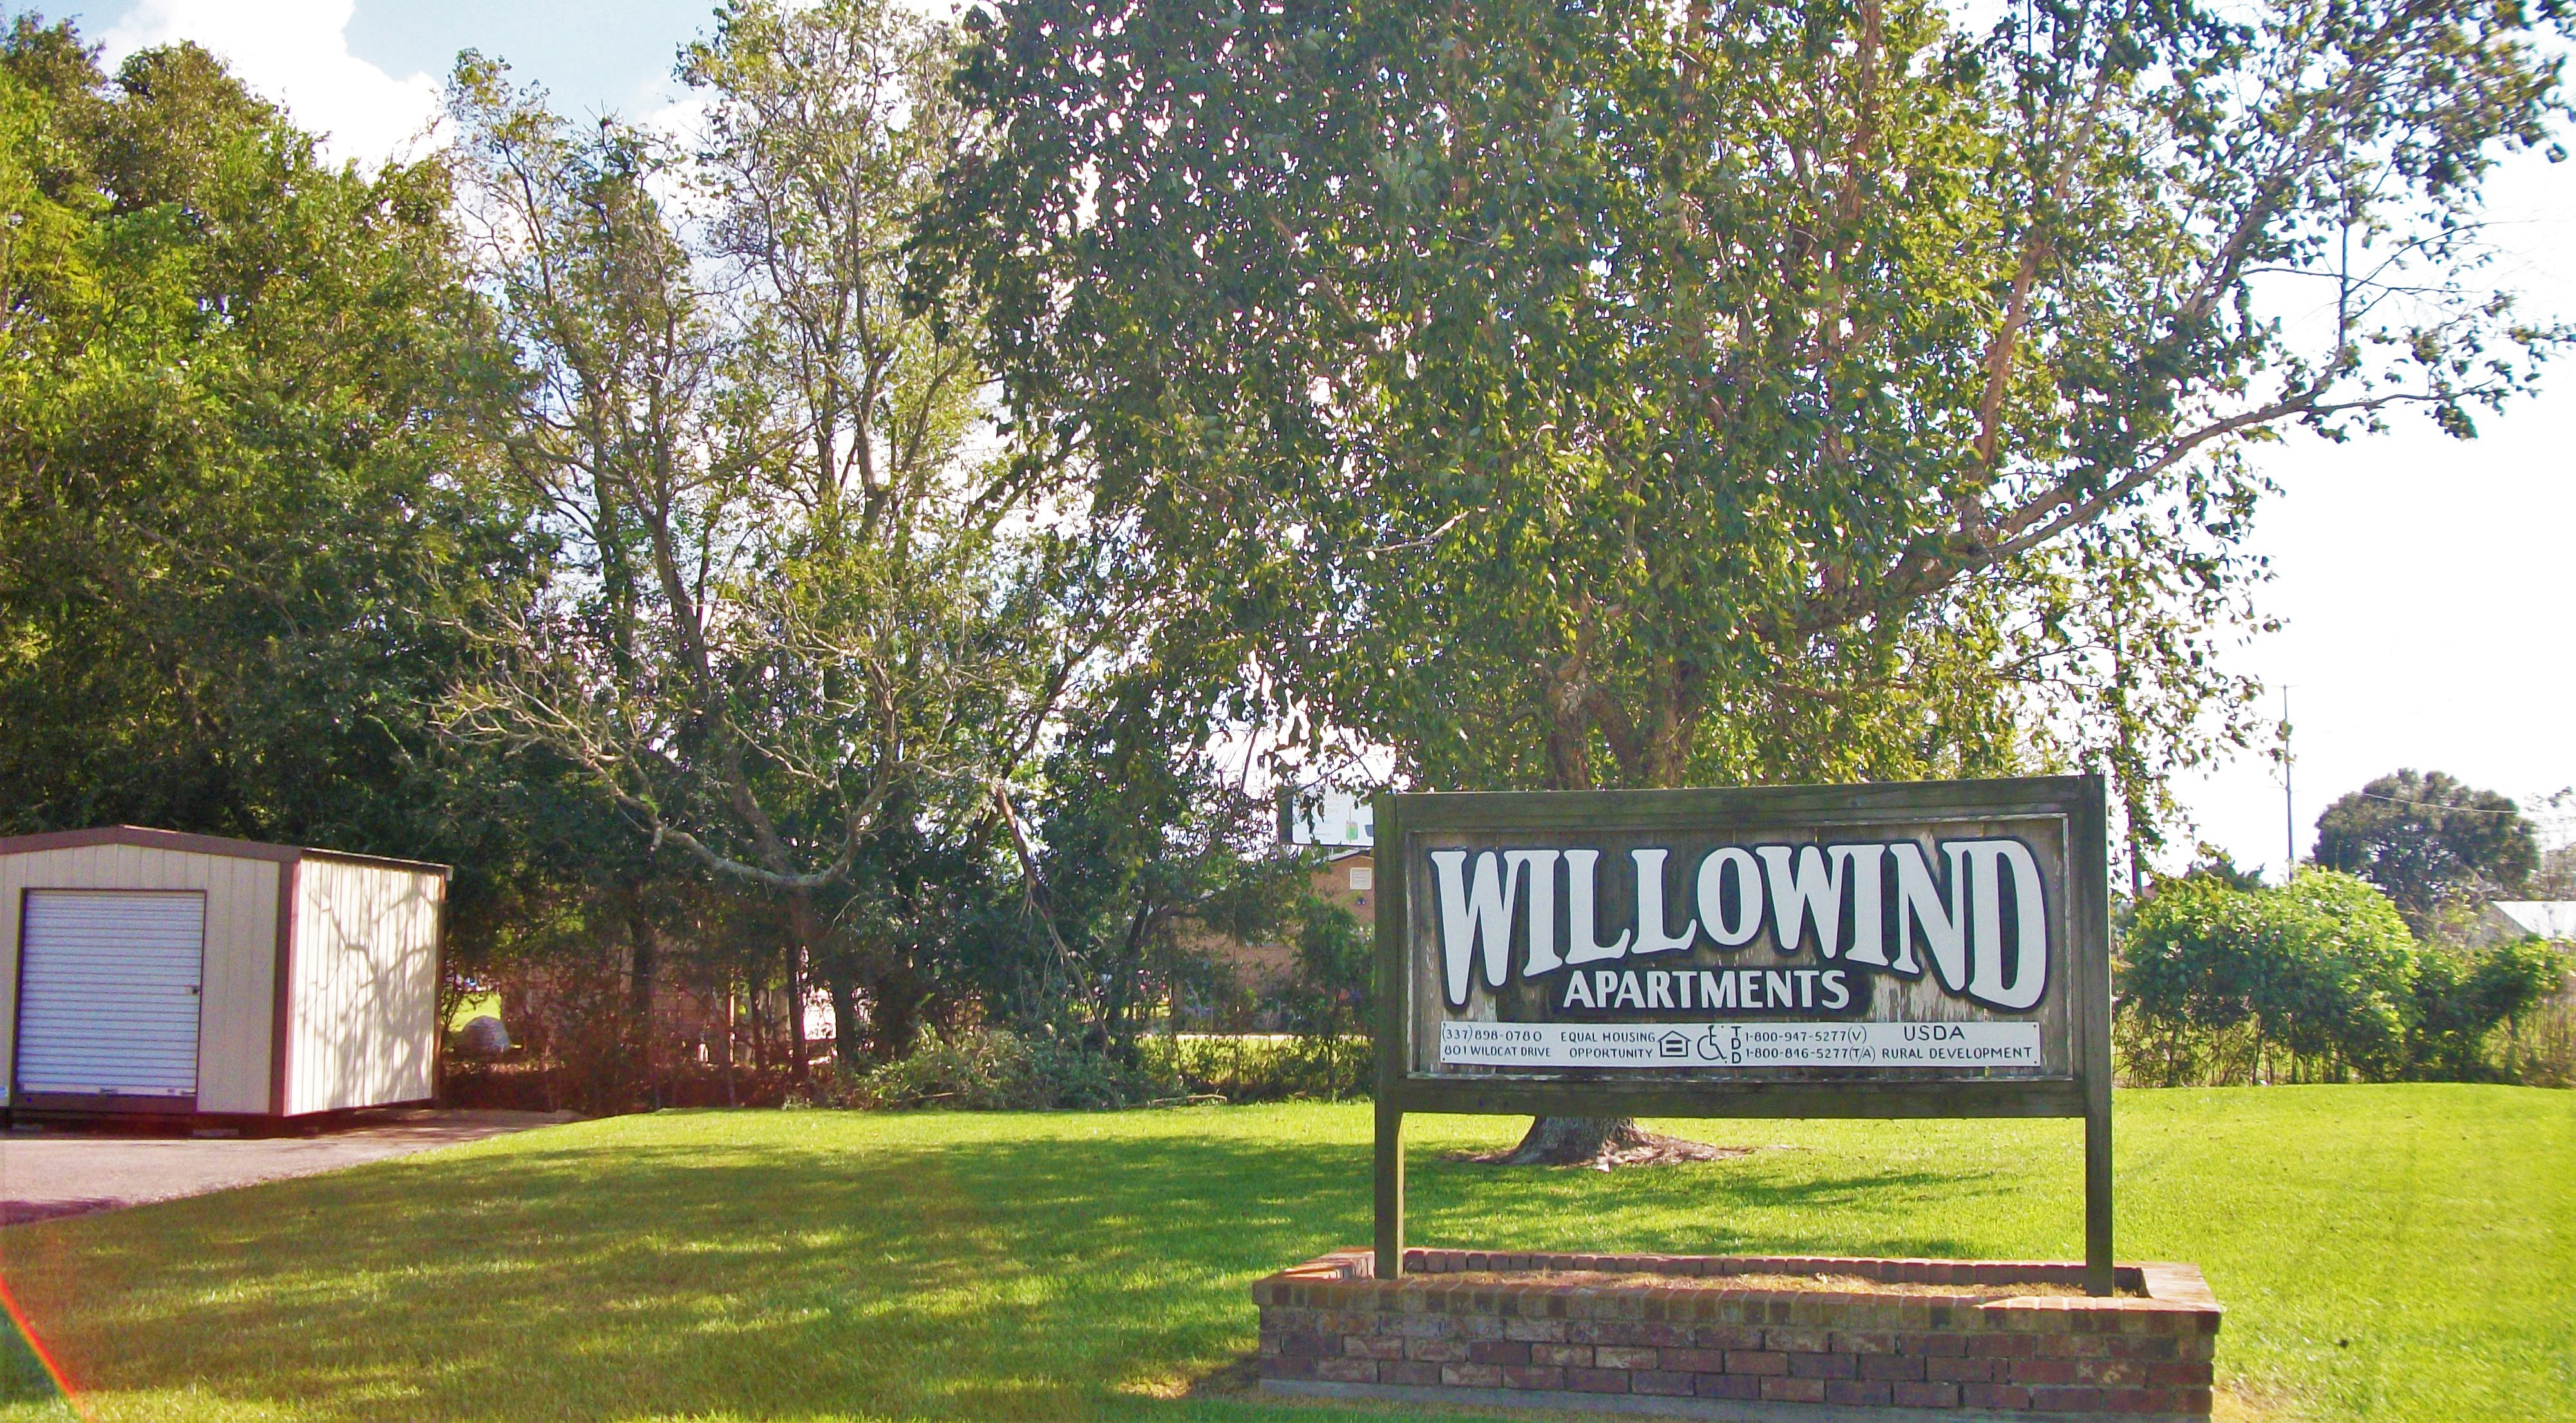 WILLOWIND APARTMENTS